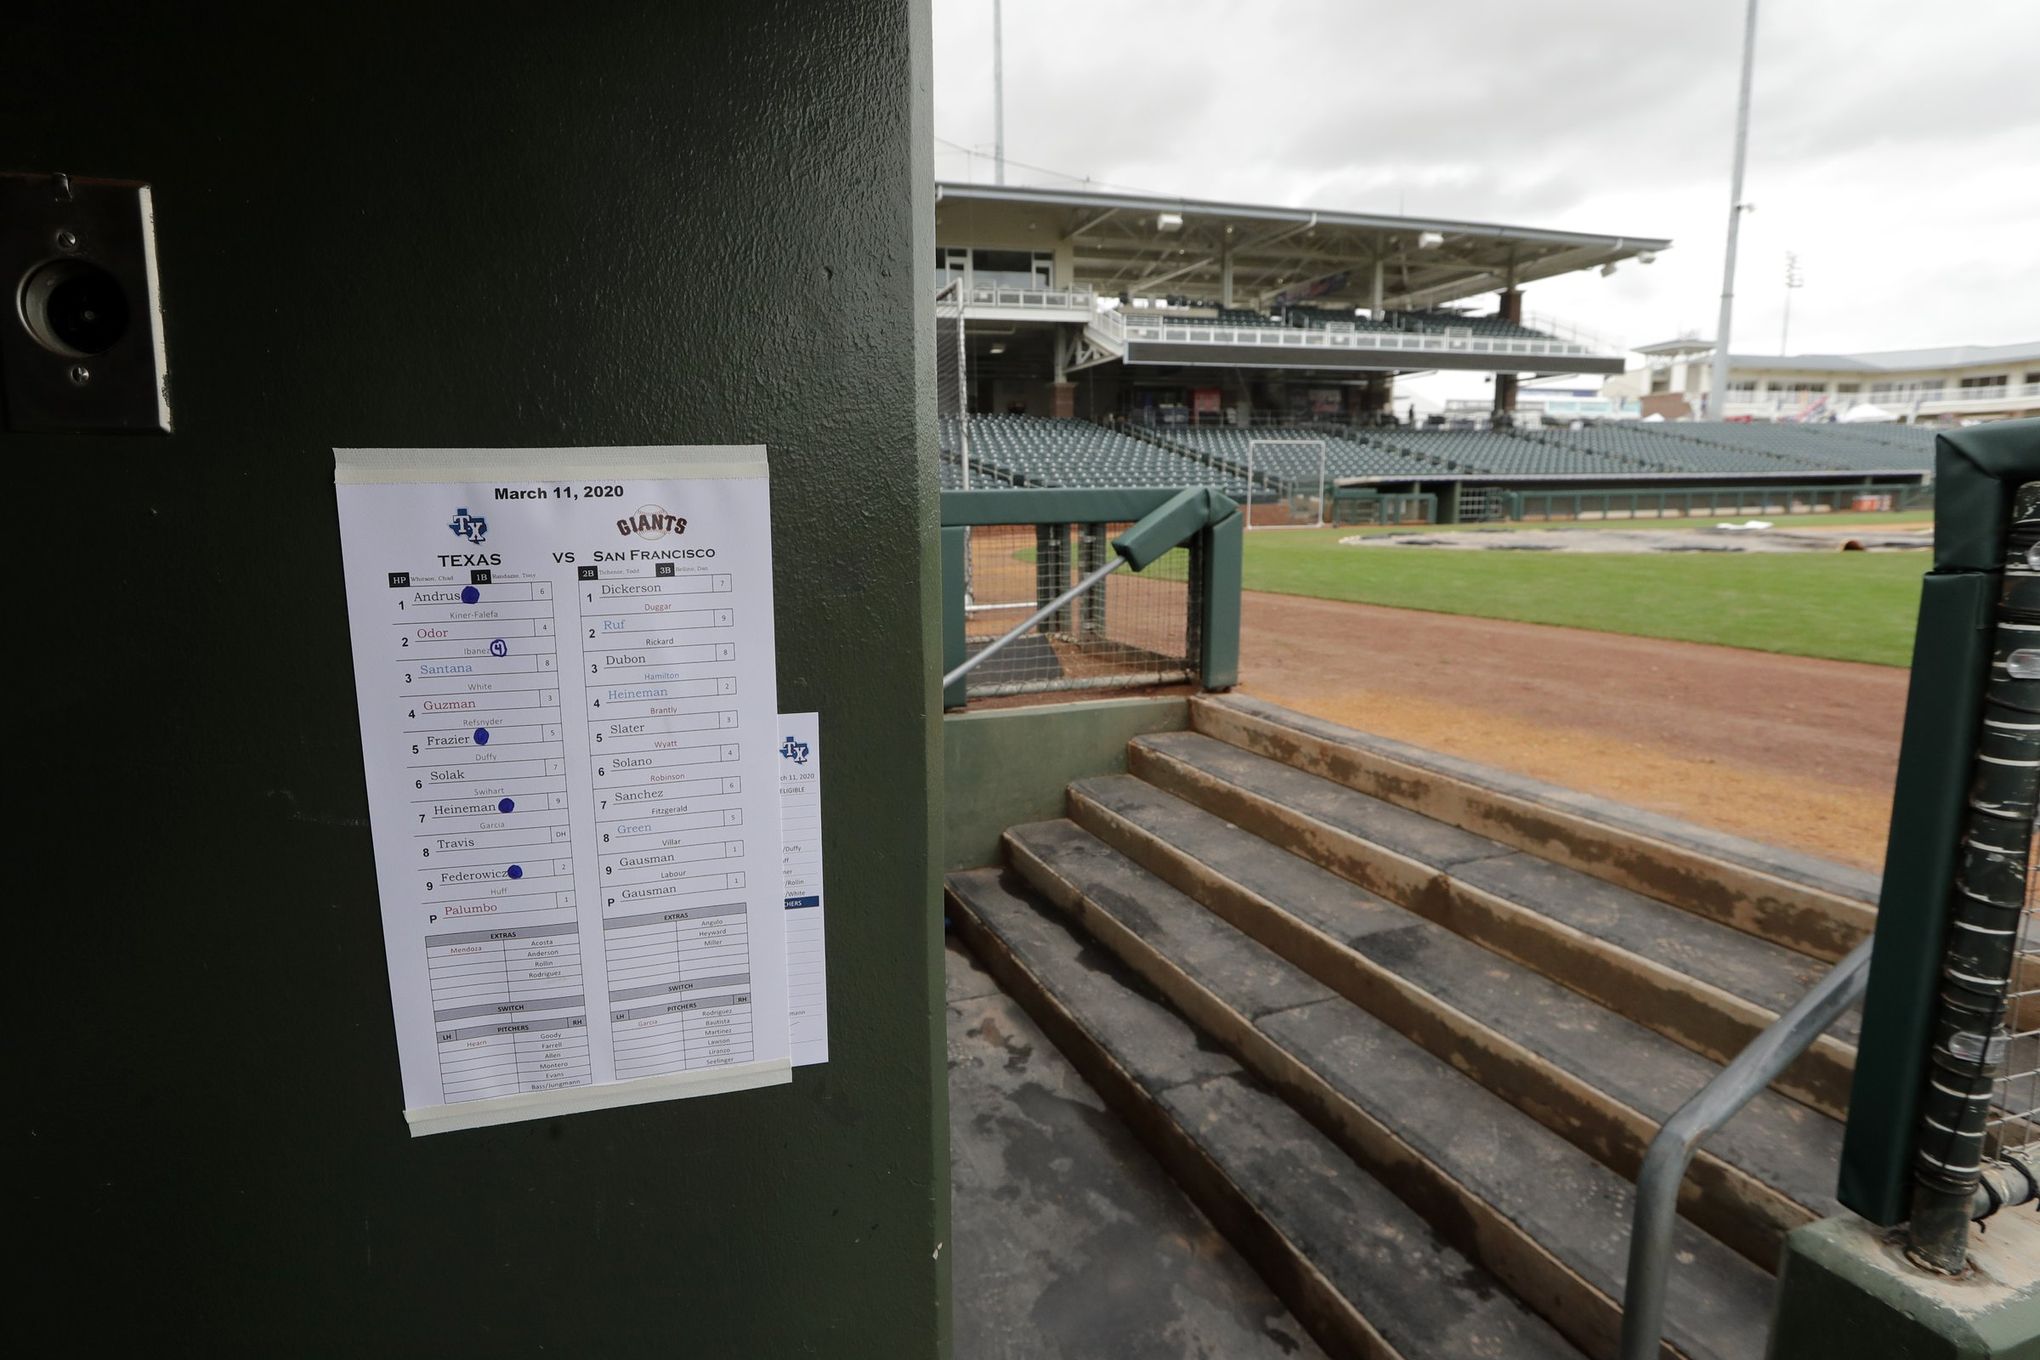 Mariners latest club to shut down spring training operations - The Columbian